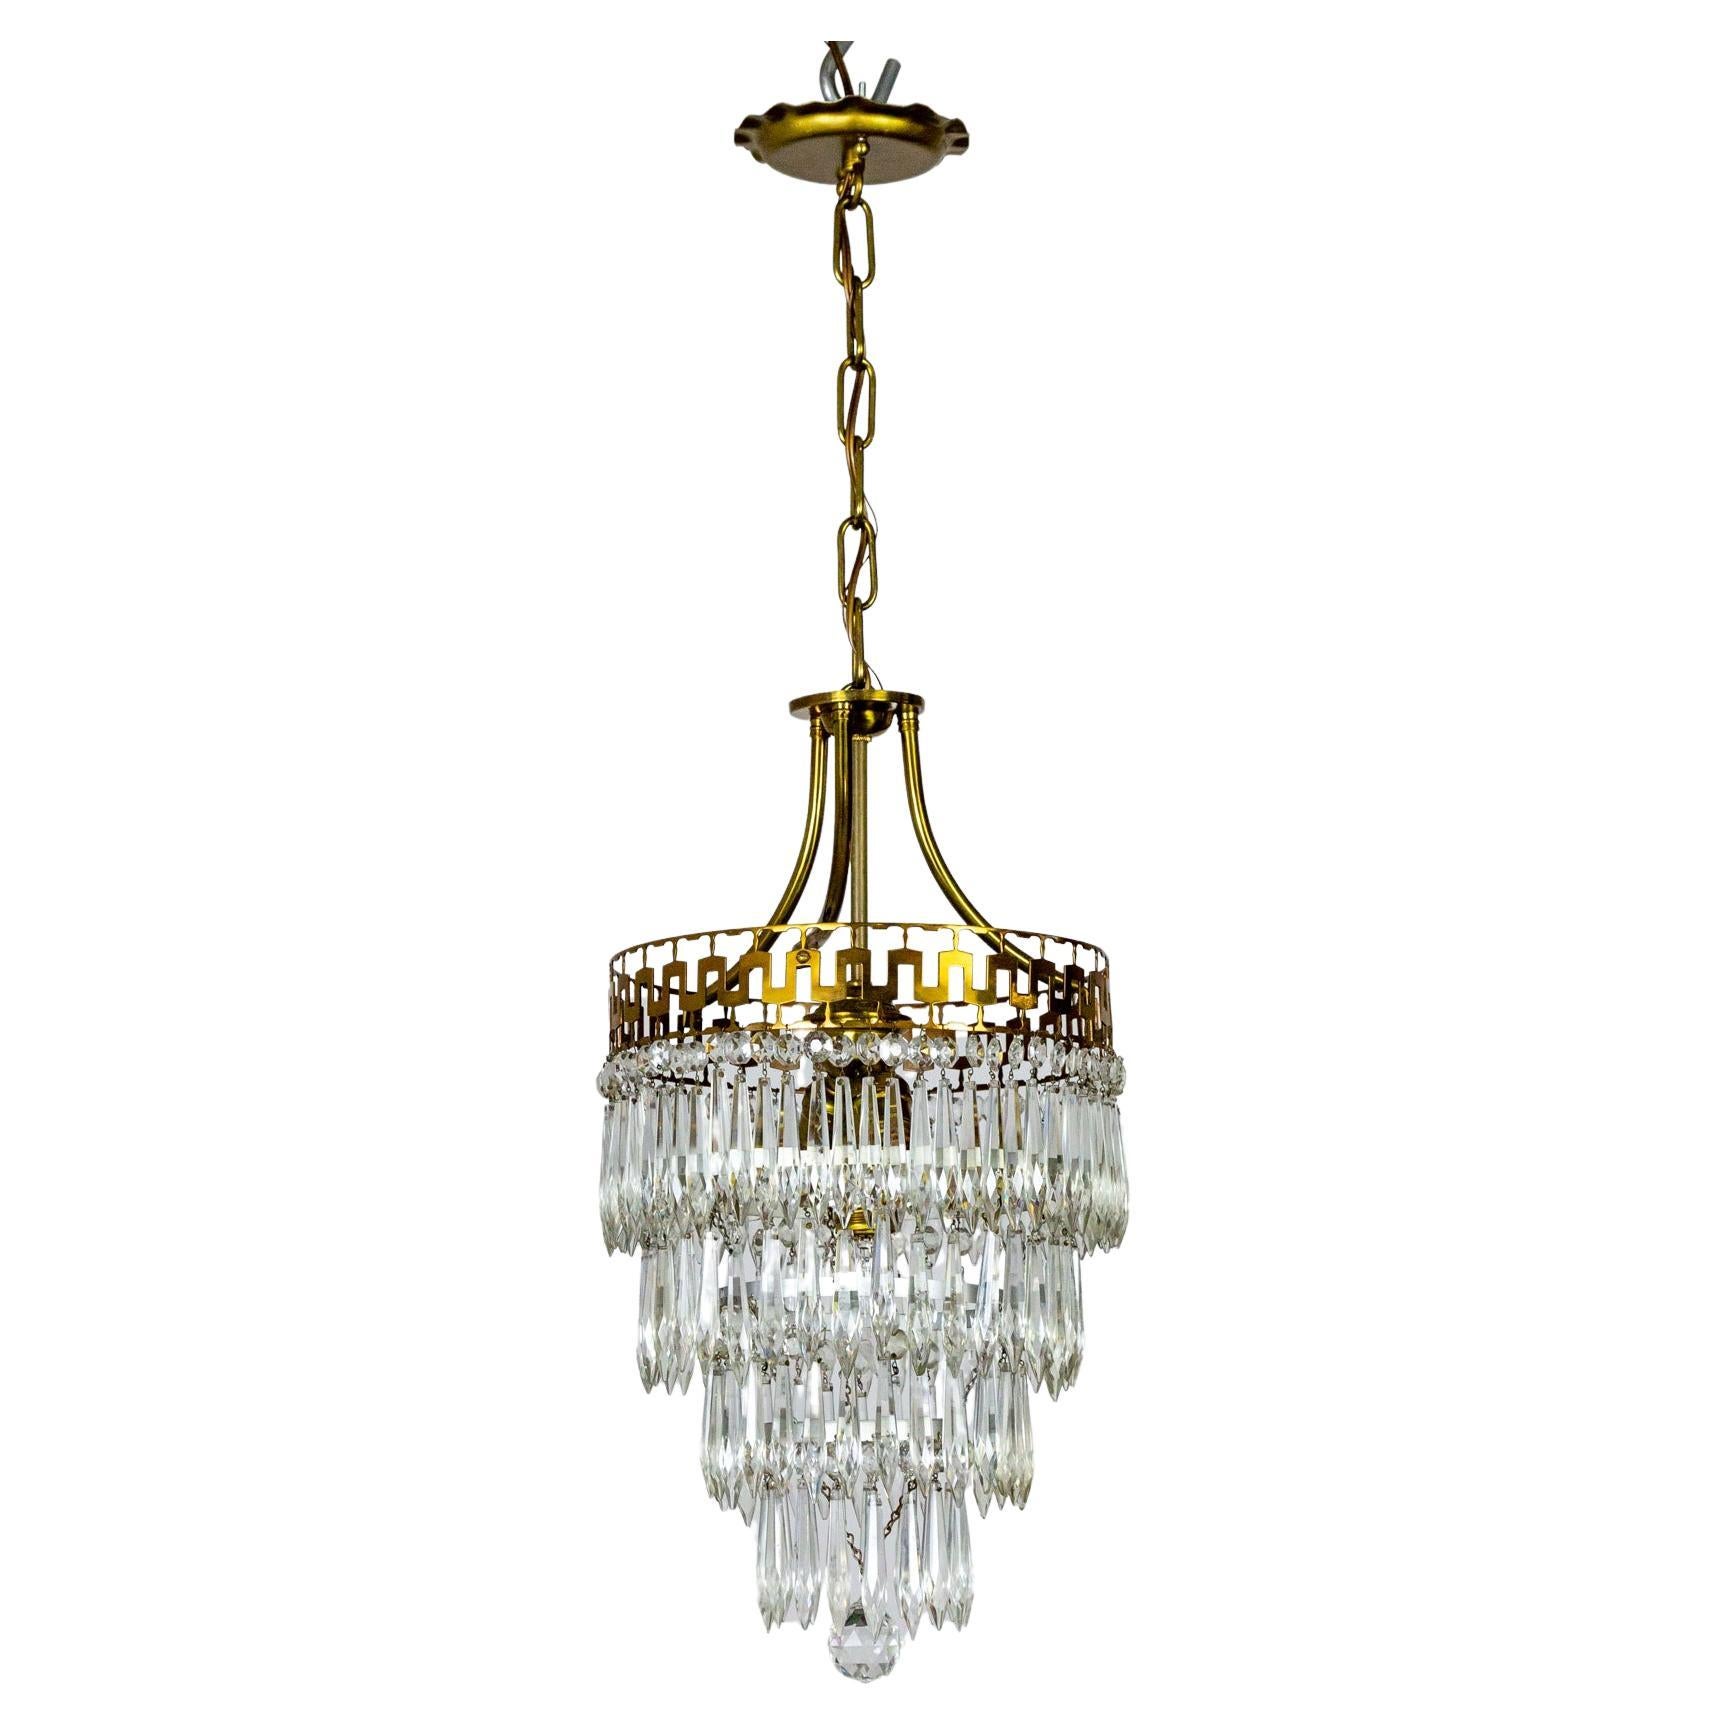 Mid-20th Cent. Neoclassical Cut Brass & Crystal Wedding Cake Pendant Light For Sale